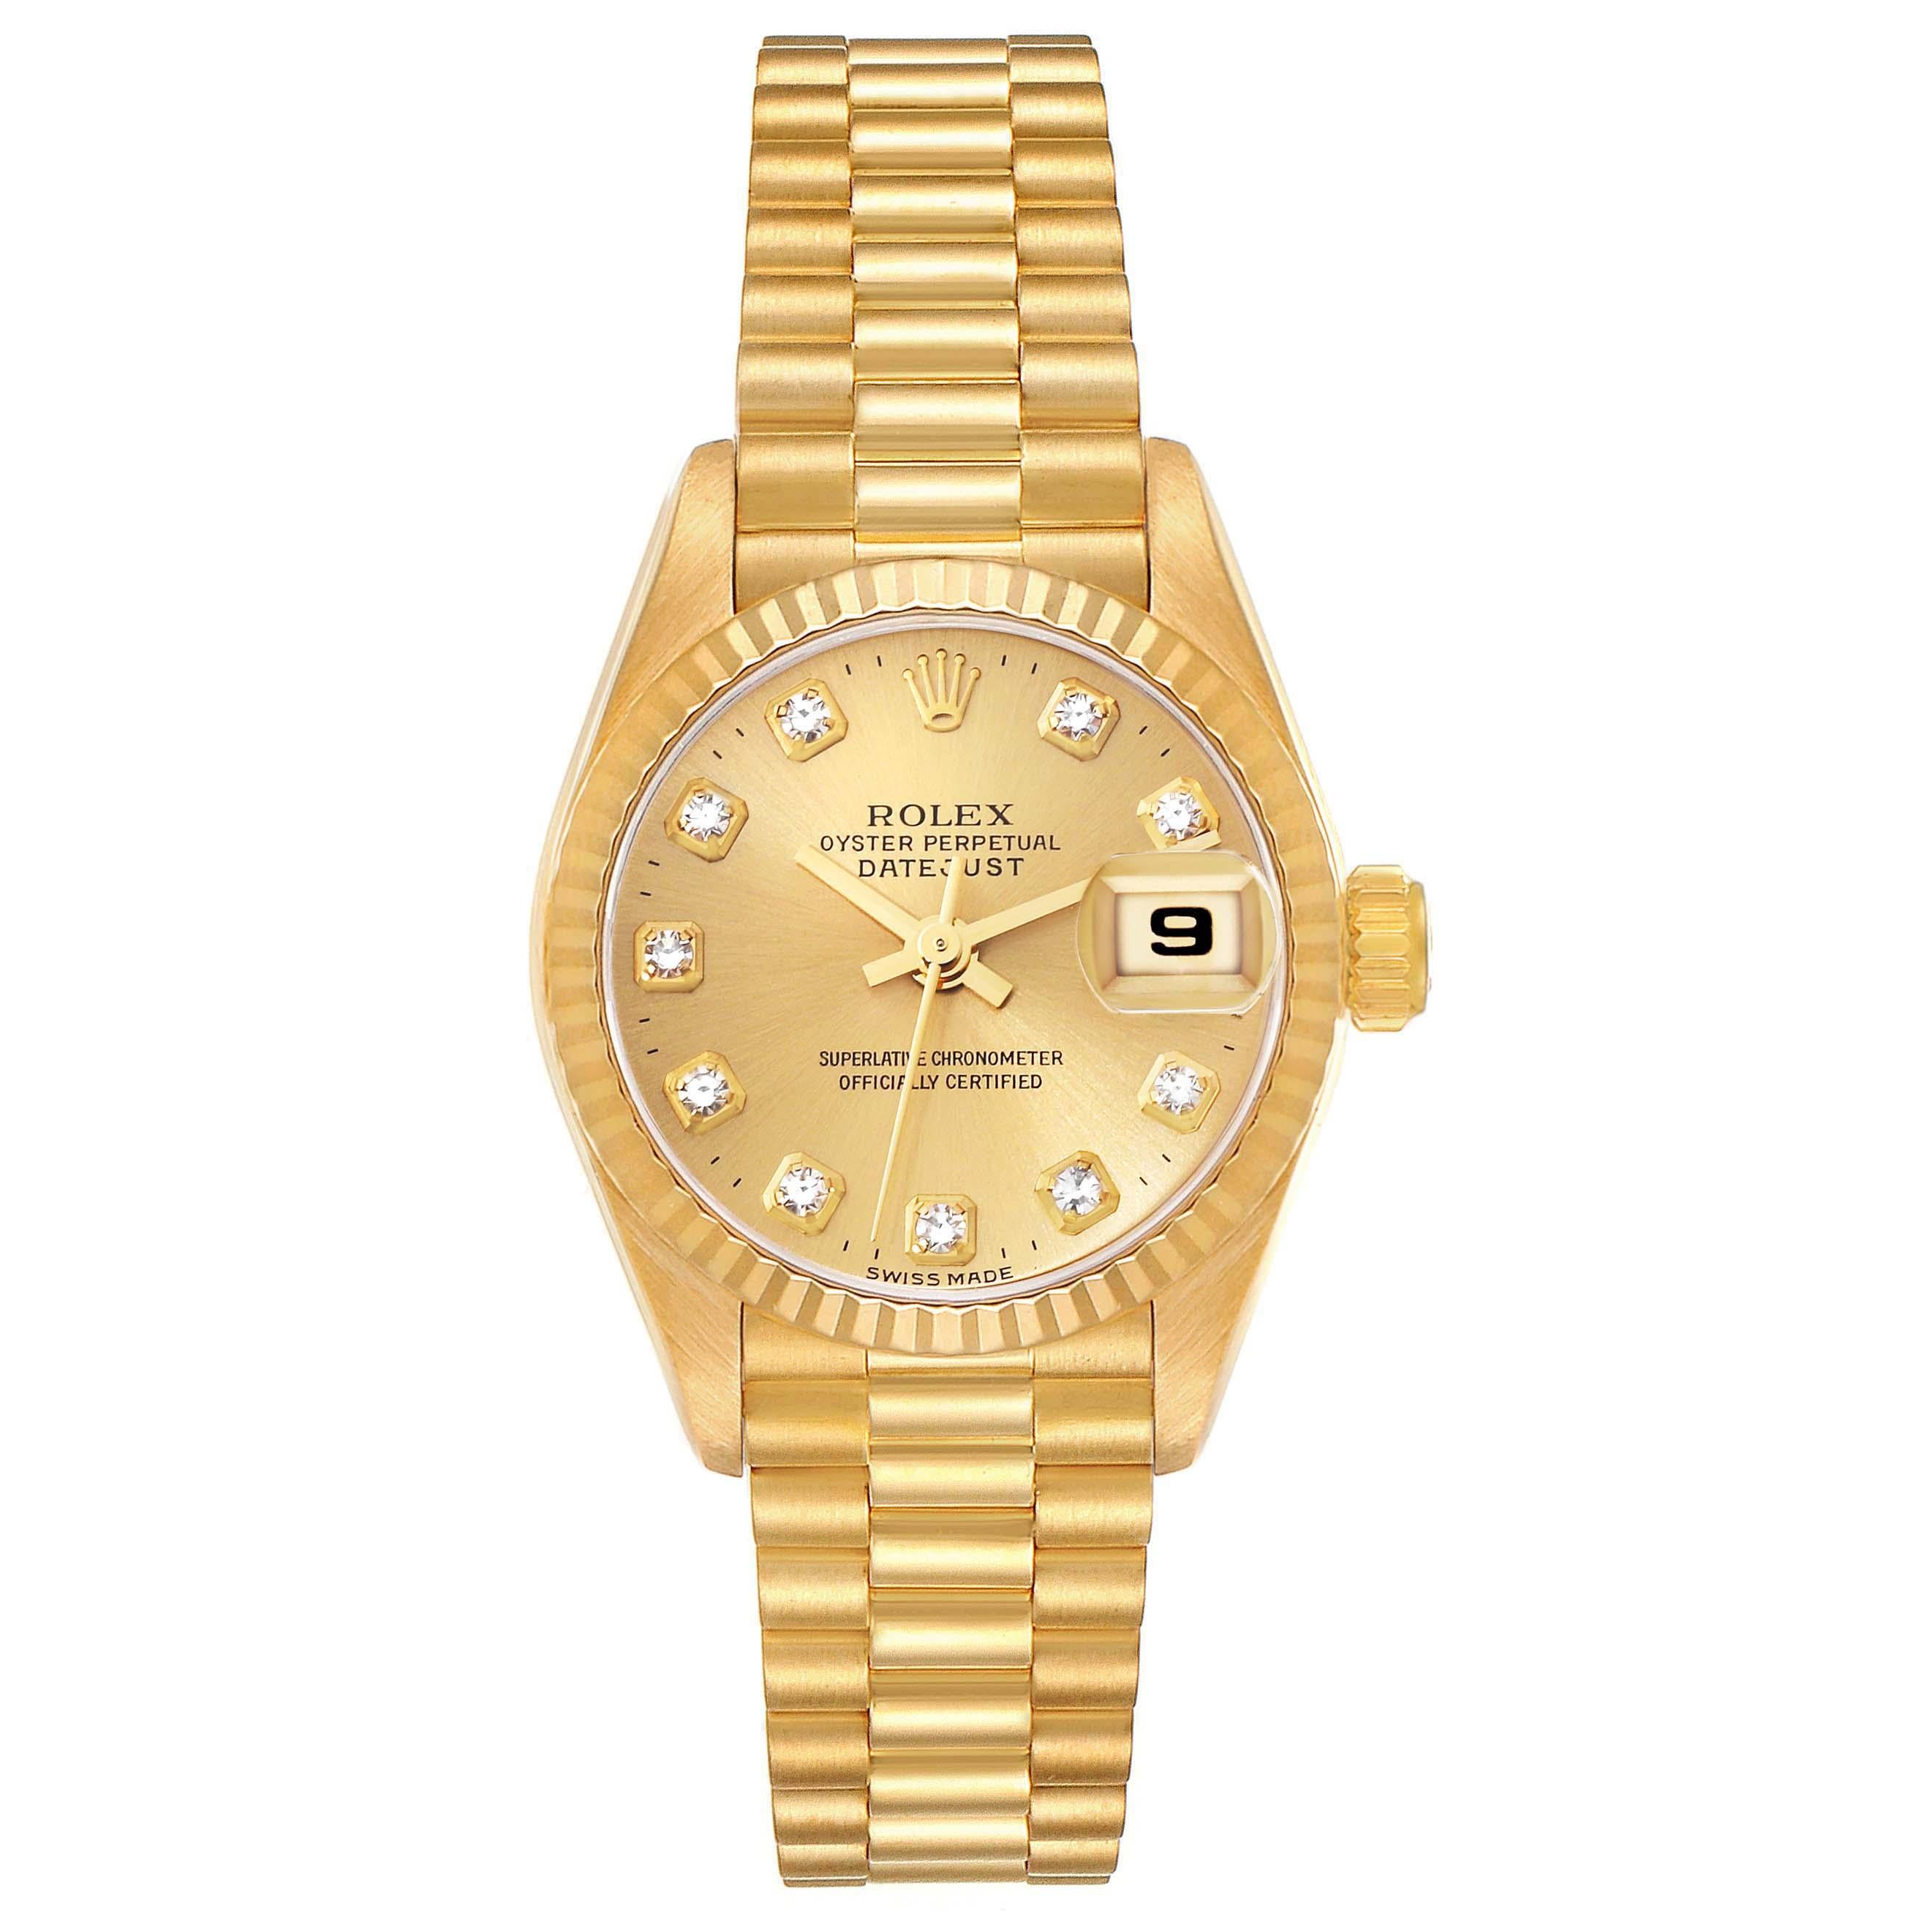 Rolex Datejust President Diamond Dial Yellow Gold Ladies Watch 69178. Officially certified chronometer automatic self-winding movement. 18k yellow gold oyster case 26.0 mm in diameter. Rolex logo on the crown. 18k yellow gold fluted bezel. Scratch